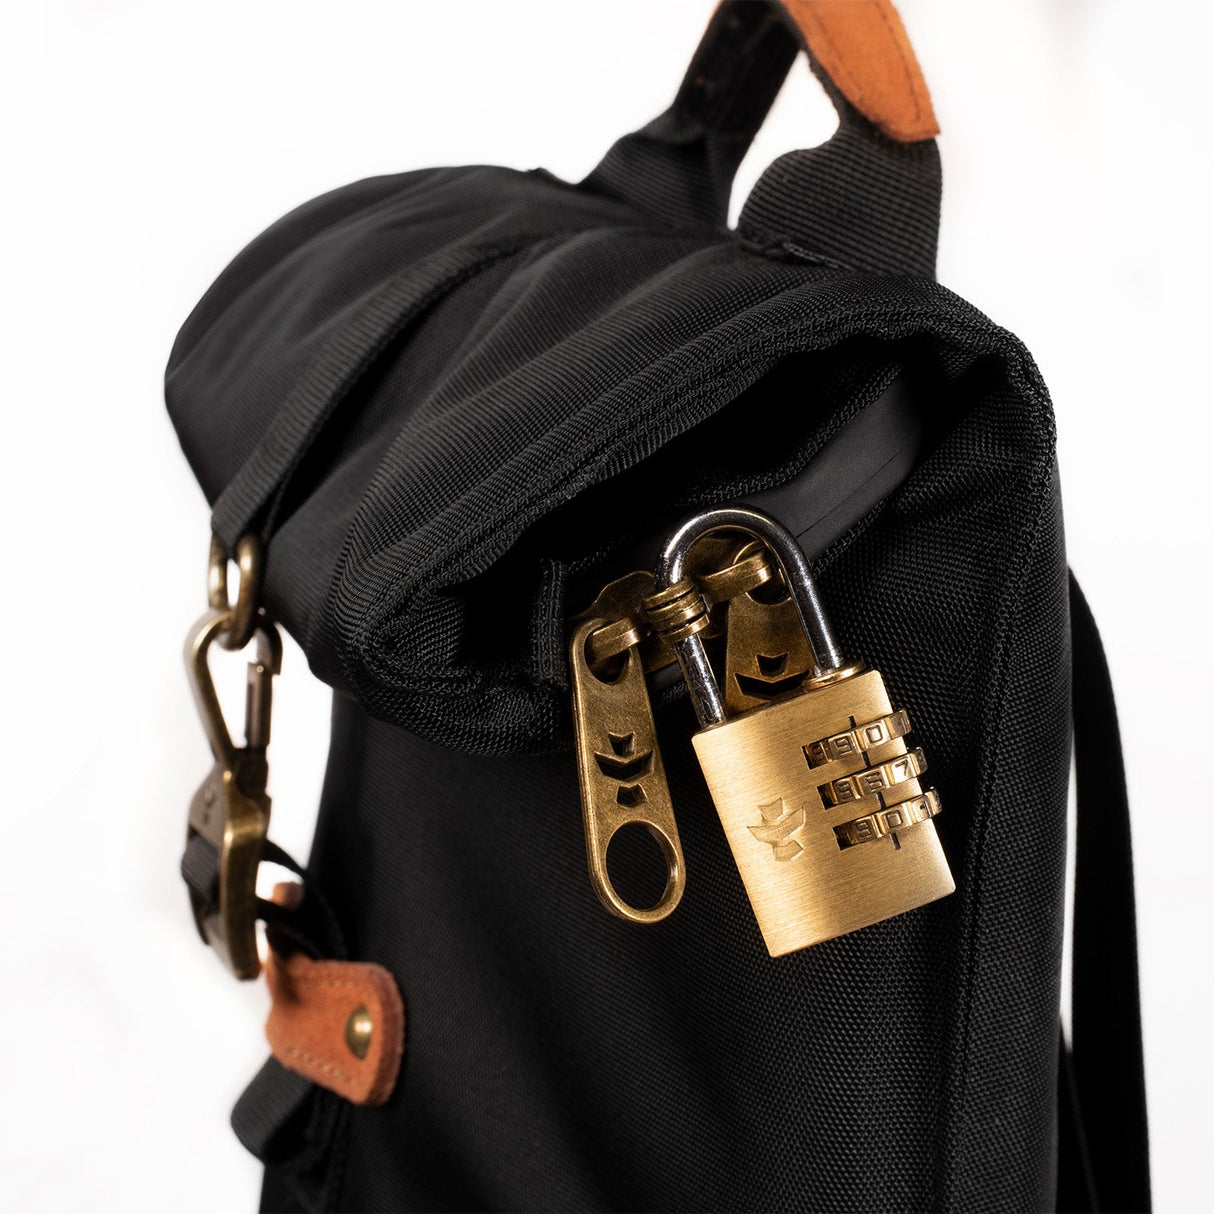 Close-up of The Defender smell proof padded backpack by Revelry Supply with lock detail